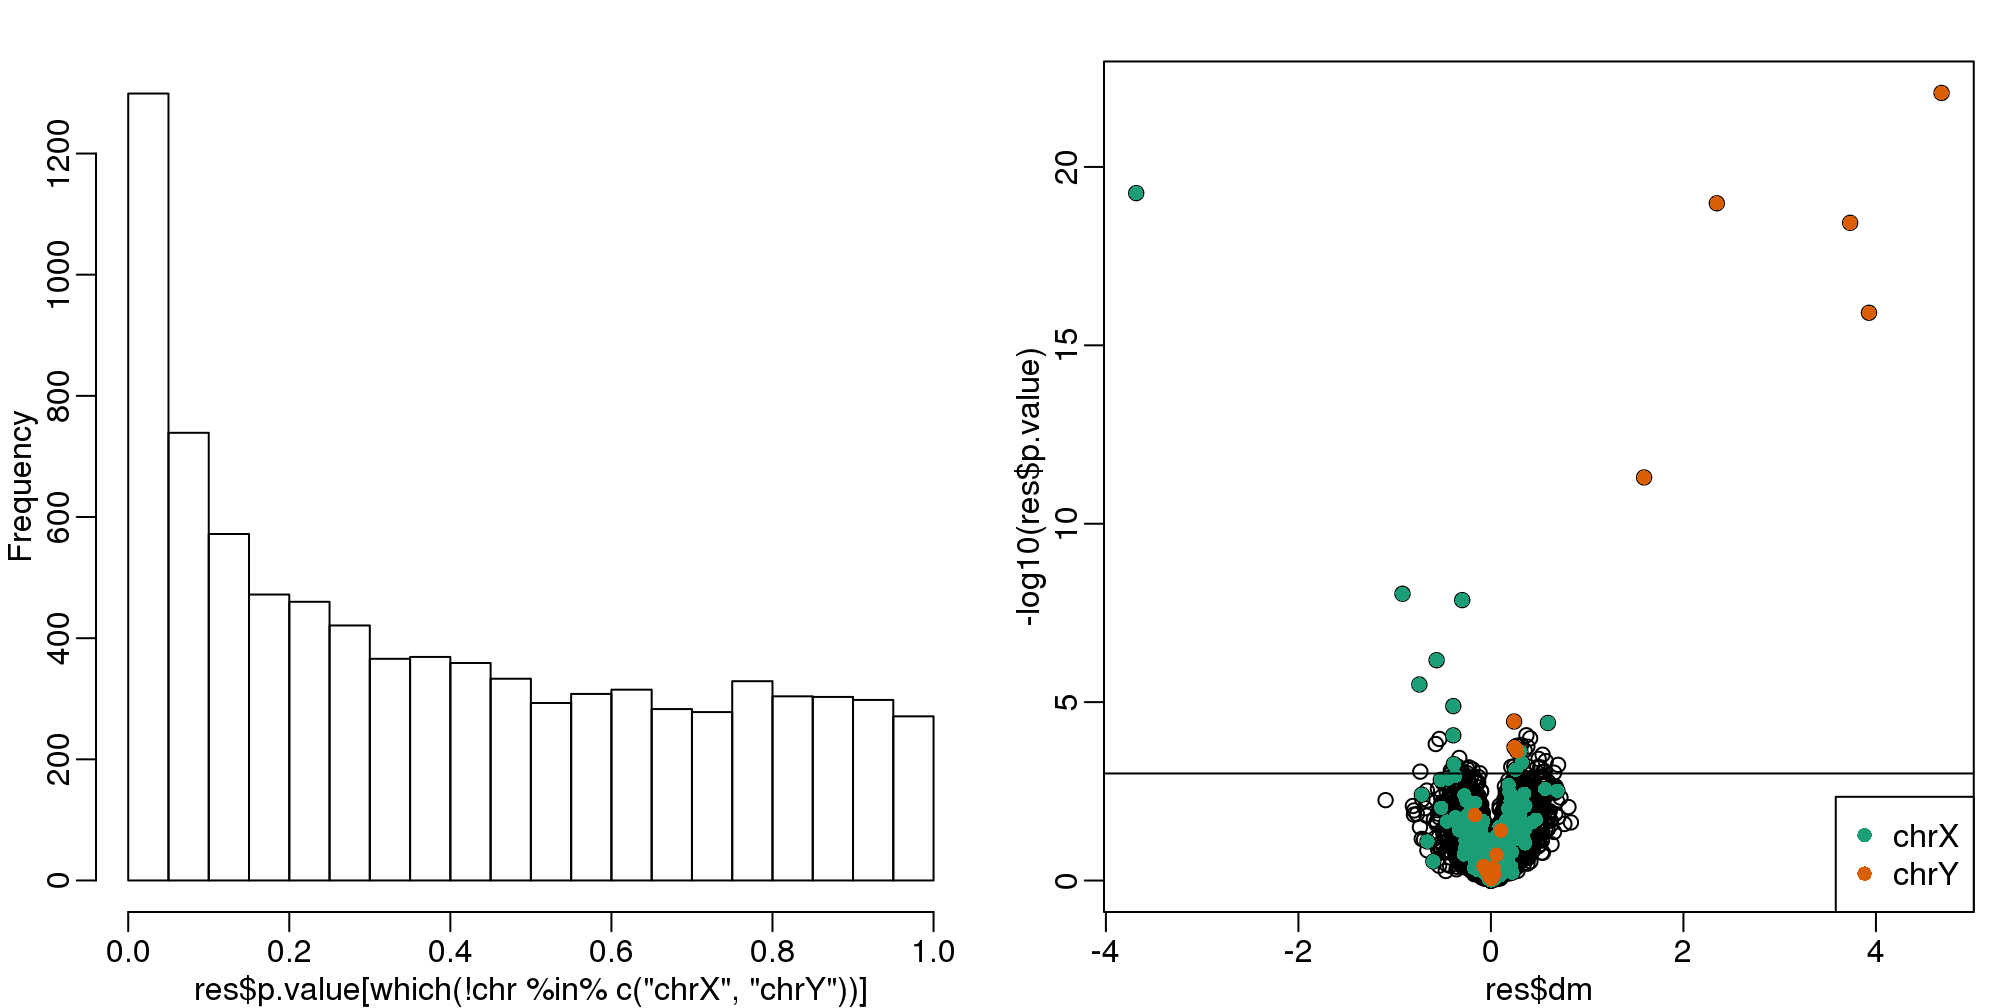 p-value histogram and volcano plot for comparison between sexes. The Y chromosome genes (considered to be positives) are highlighted in red. The X chromosome genes (a subset is considered to be positive) are shown in green.